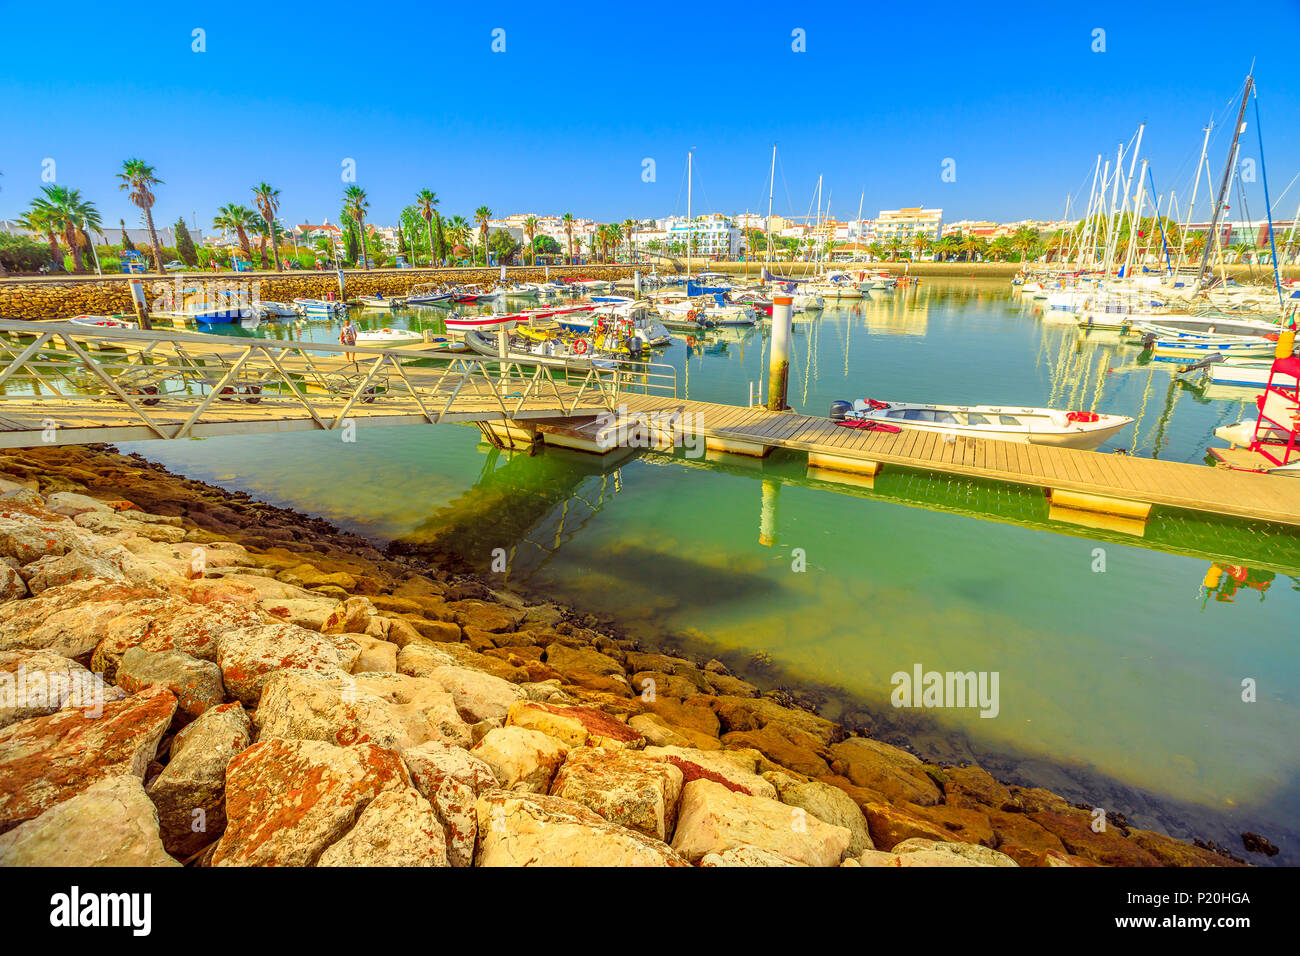 Beautiful landscape of yacht, charter and motorboats in Marina de Lagos. The Marina is located in Bay of Lagos, Algarve coast, Portugal, Europe. Summe Stock Photo